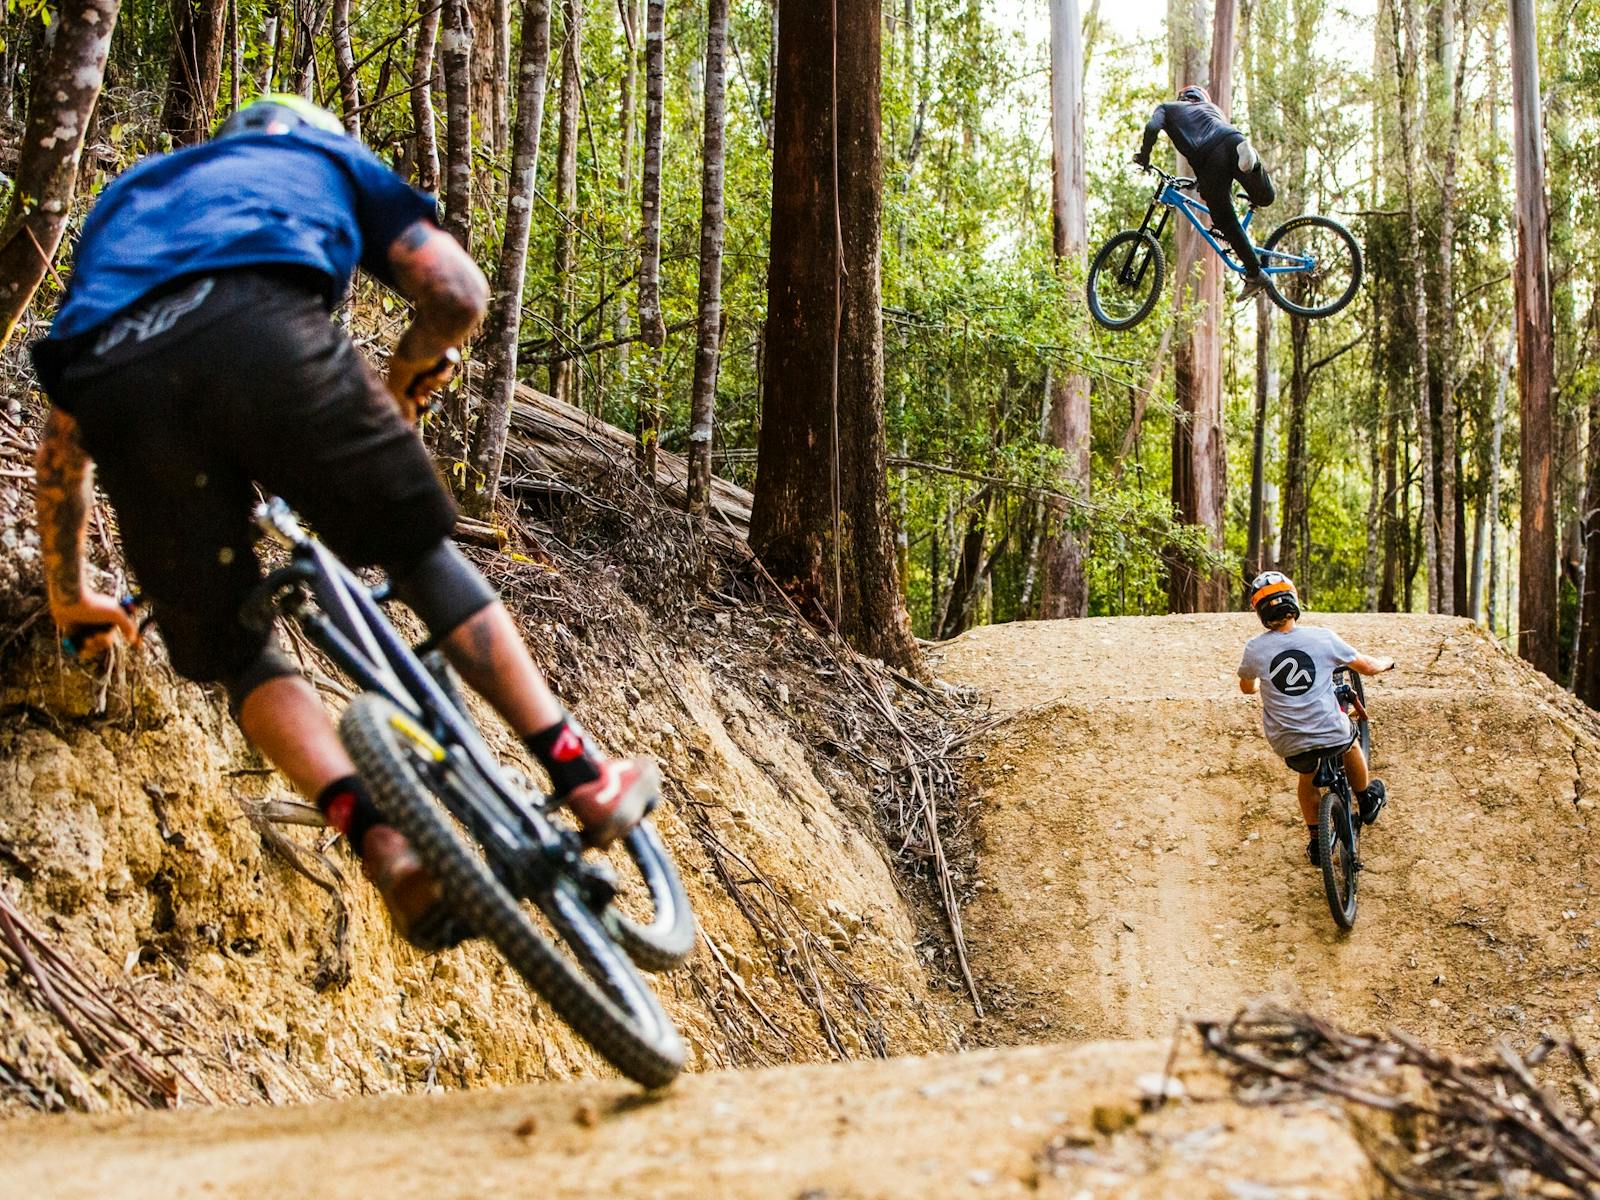 Group of riders on one of Maydena Jump Freeride Trails